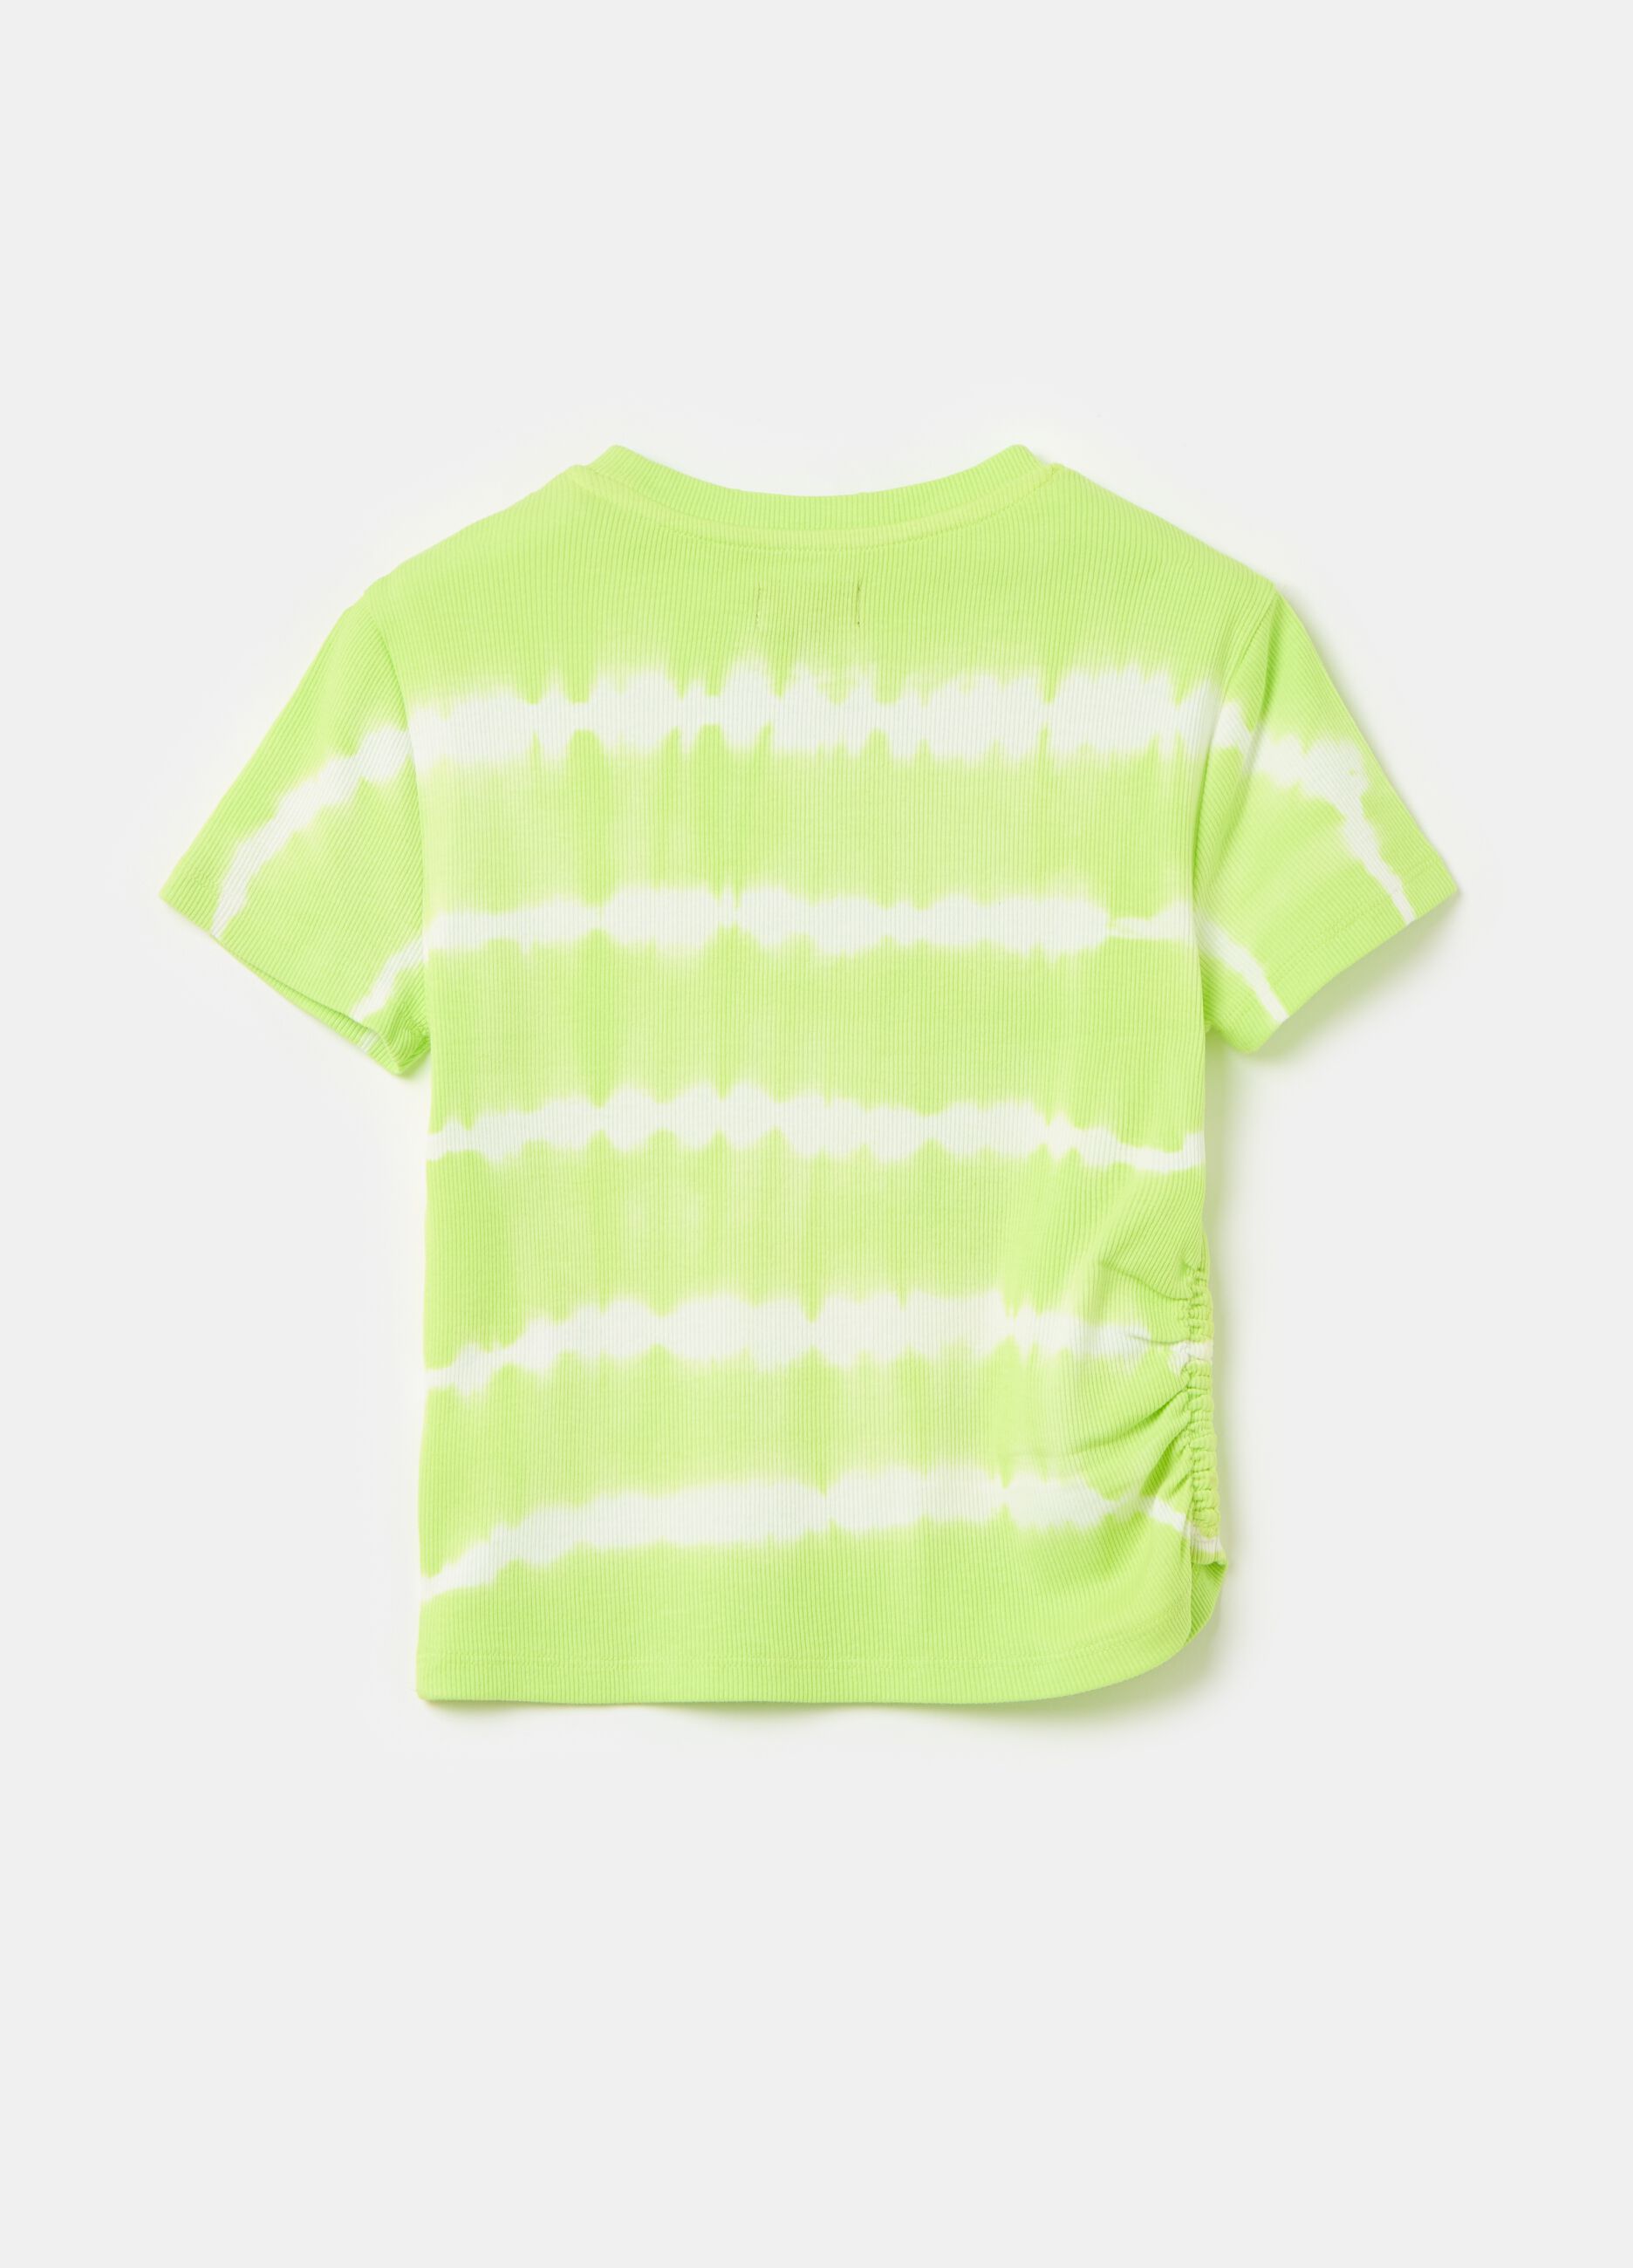 Ribbed T-shirt with tie-dye pattern